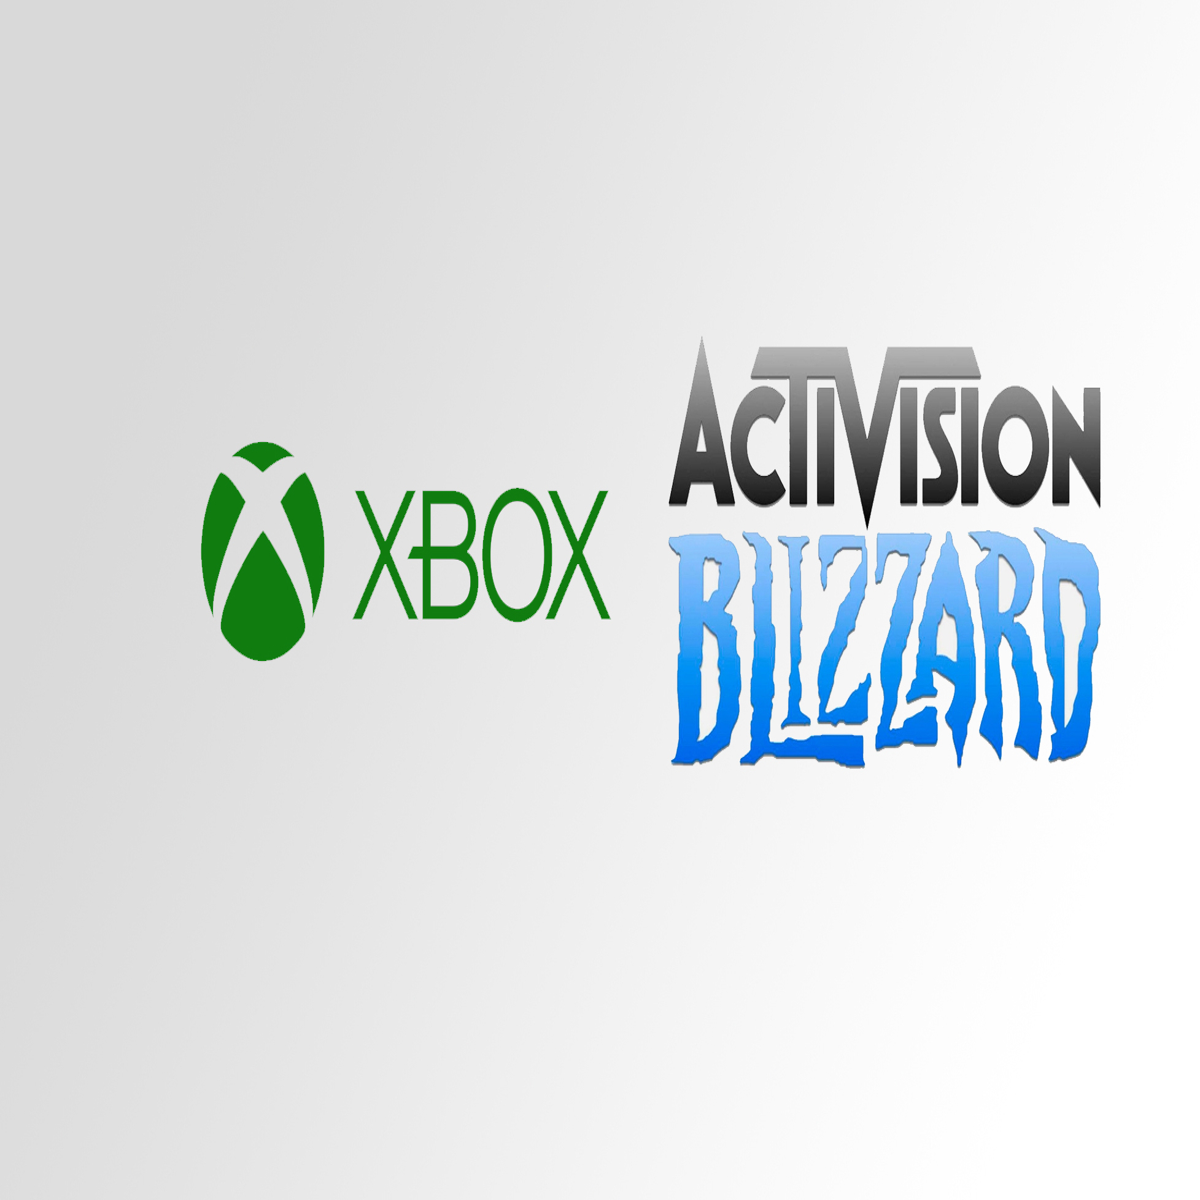 BREAKING: Xbox Has WON Xbox Activision Blizzard DEAL Can Close 